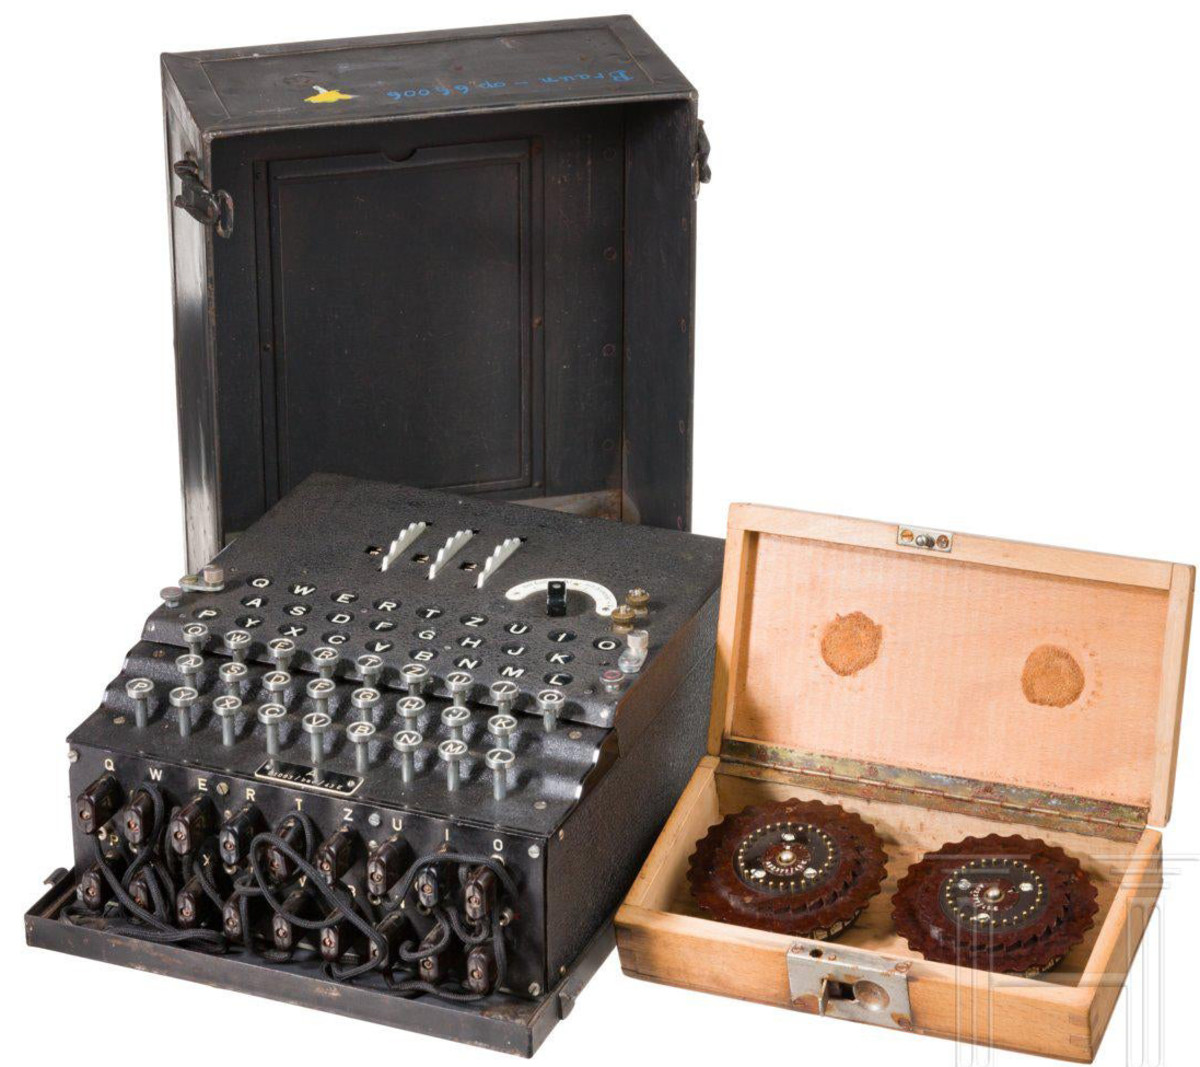 An Enigma I cipher machine, number “A 01093,” original lacquered lid, the nameplate “A 01093/bac/43 E” of the Ertel Werke in Munich from the second batch, supplied from September to December 1943. This model was used in army and air force intelligence divisions from around 1937 onward. Sold at Hermann Historica in 2020 for $100,759.